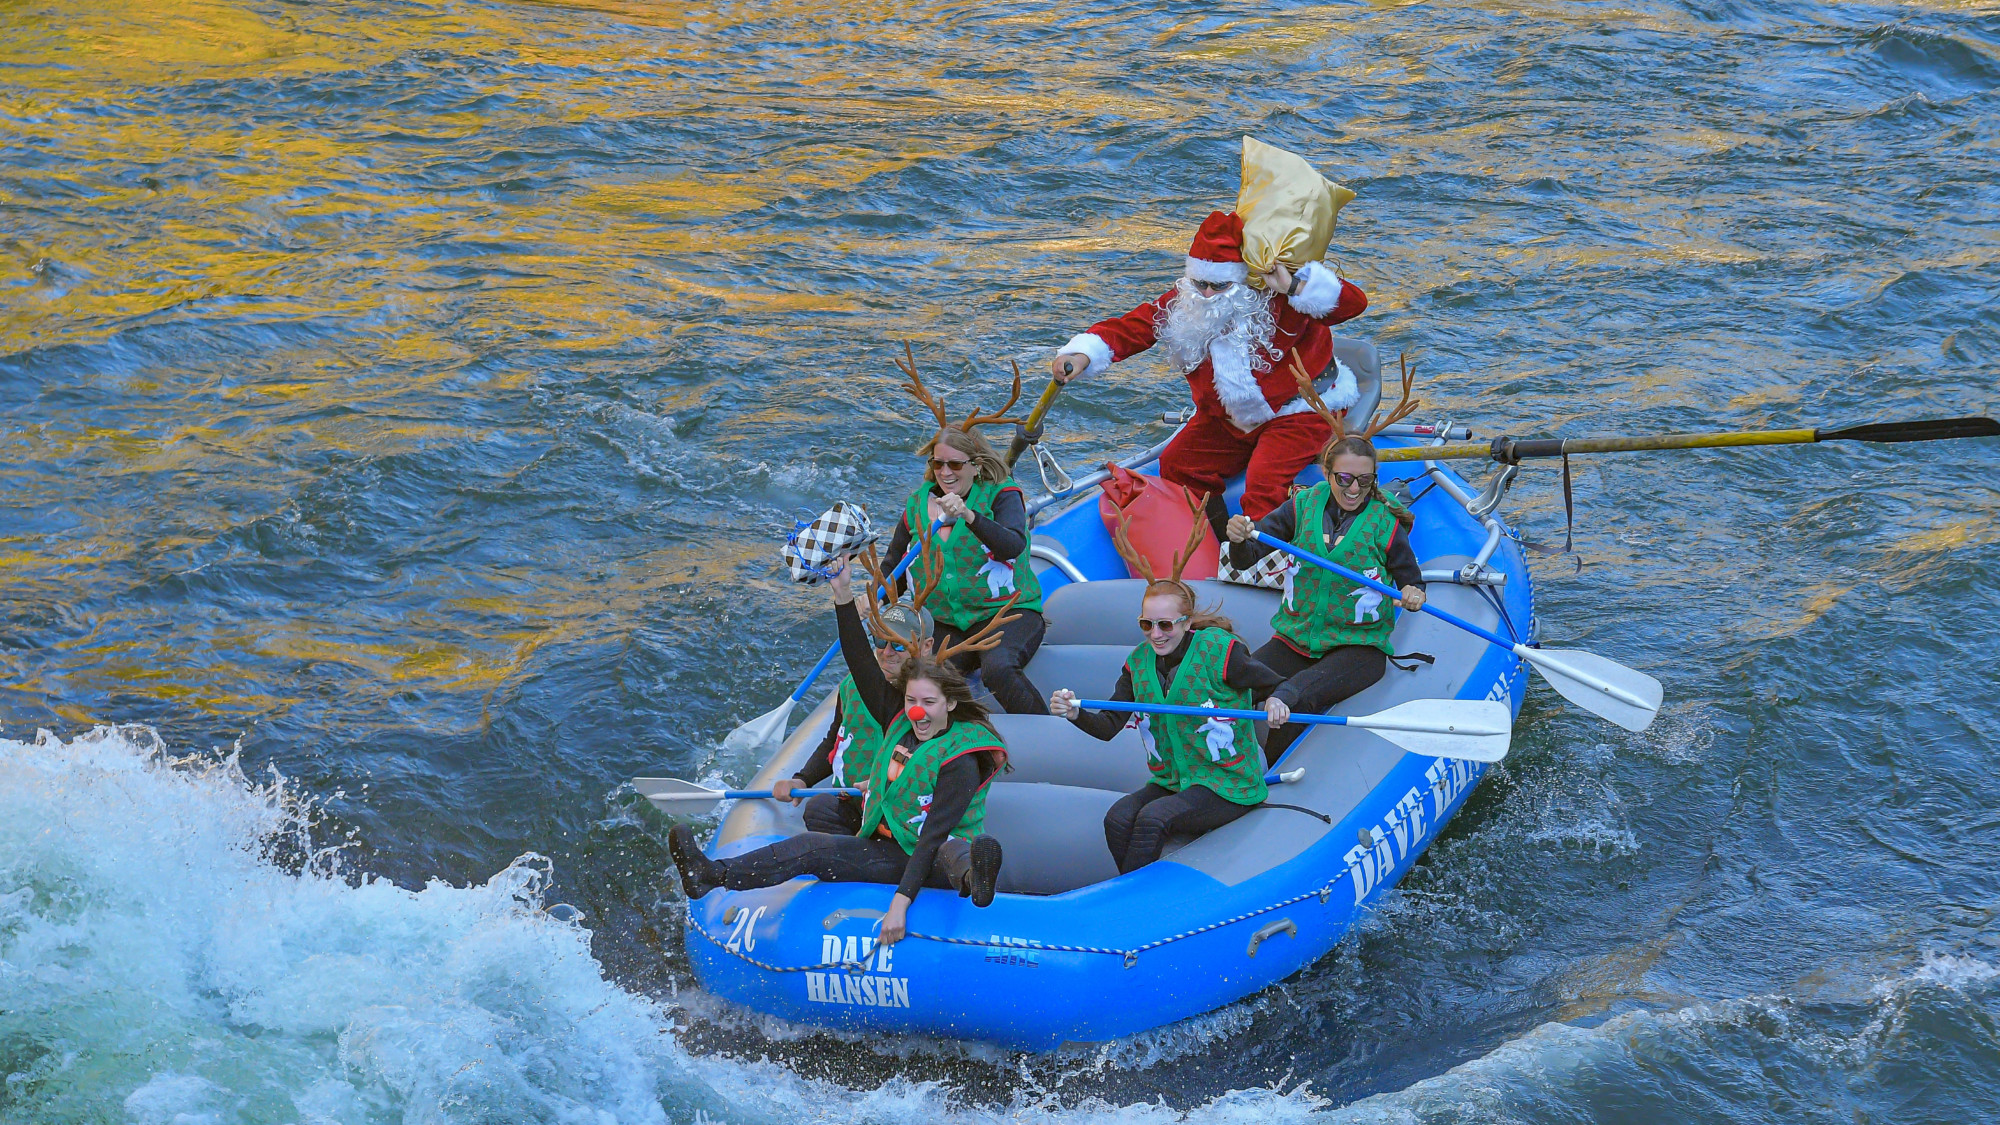 Rafters dressed in Santa and reindeer costumes ride through a whitewater rapid on the Snake River.